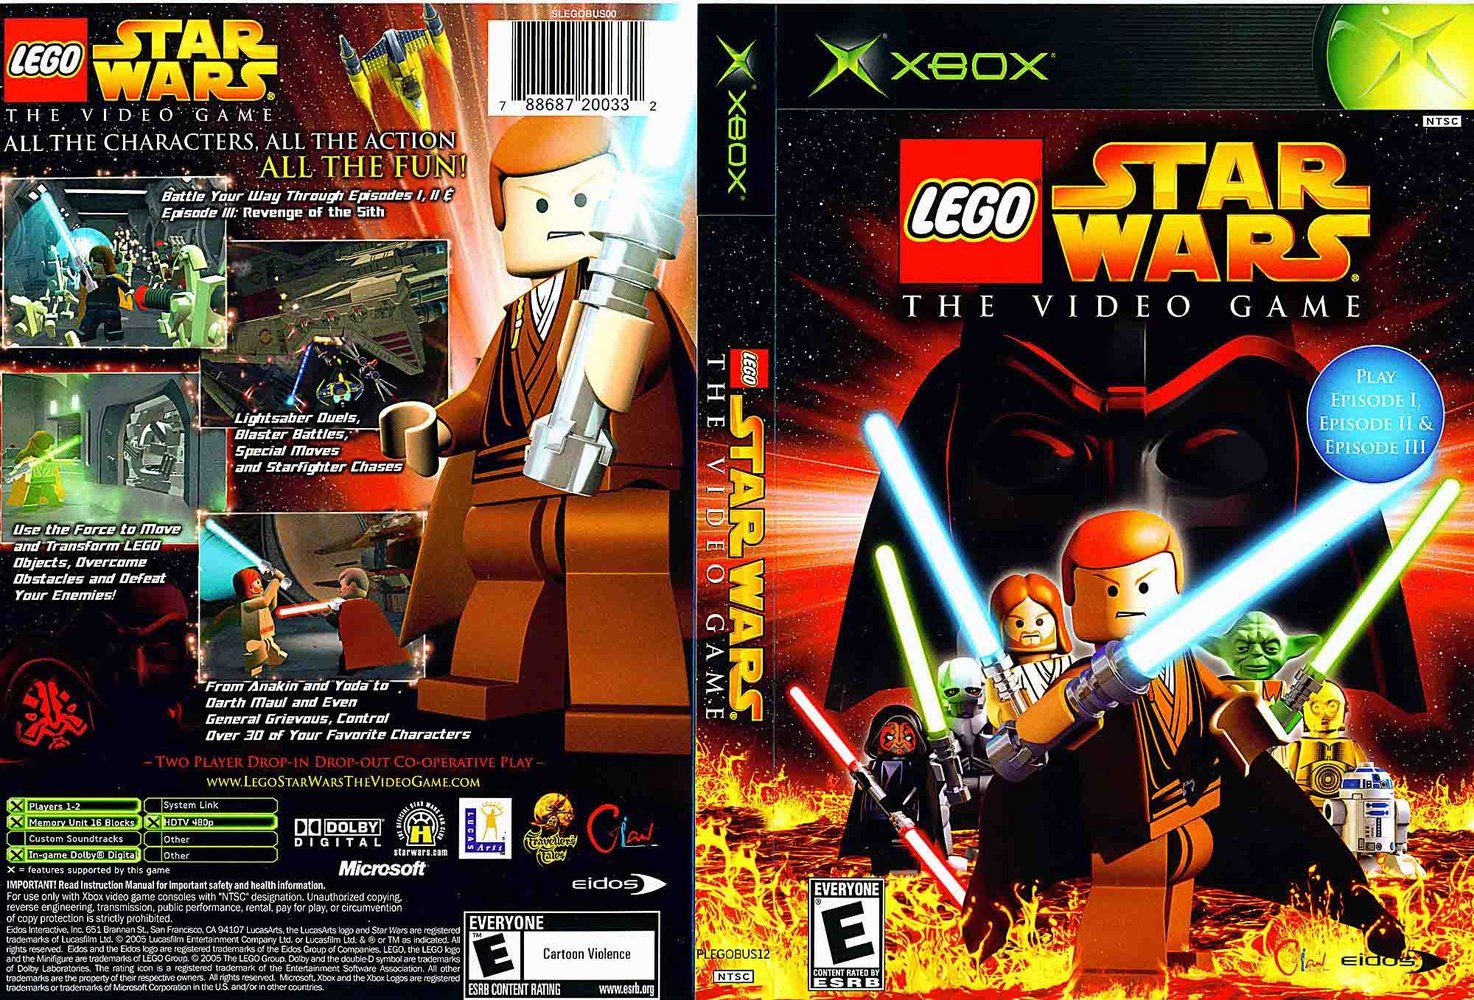 LEGO Star Wars: The Video Game #14